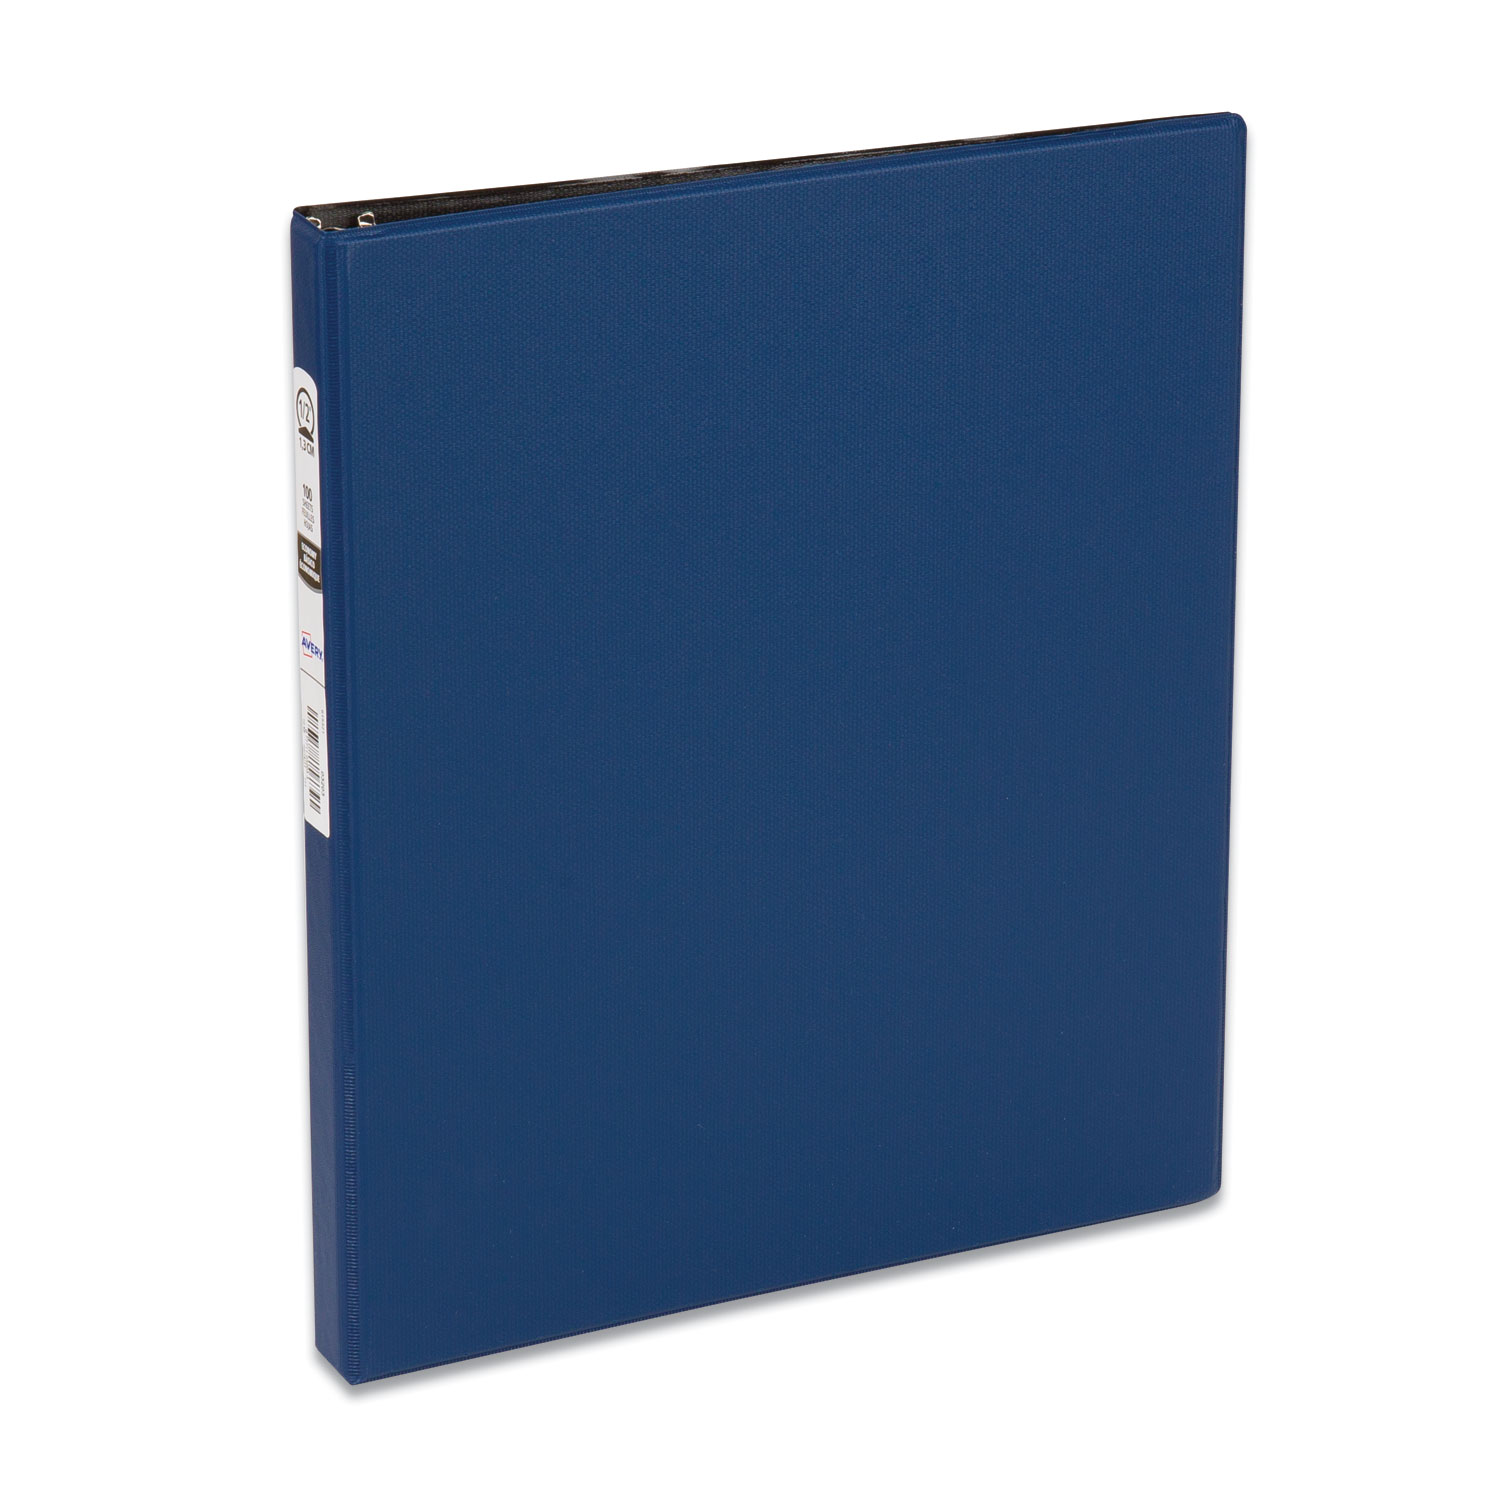  Avery 03203 Economy Non-View Binder with Round Rings, 3 Rings, 0.5 Capacity, 11 x 8.5, Blue, (3203) (AVE03203) 